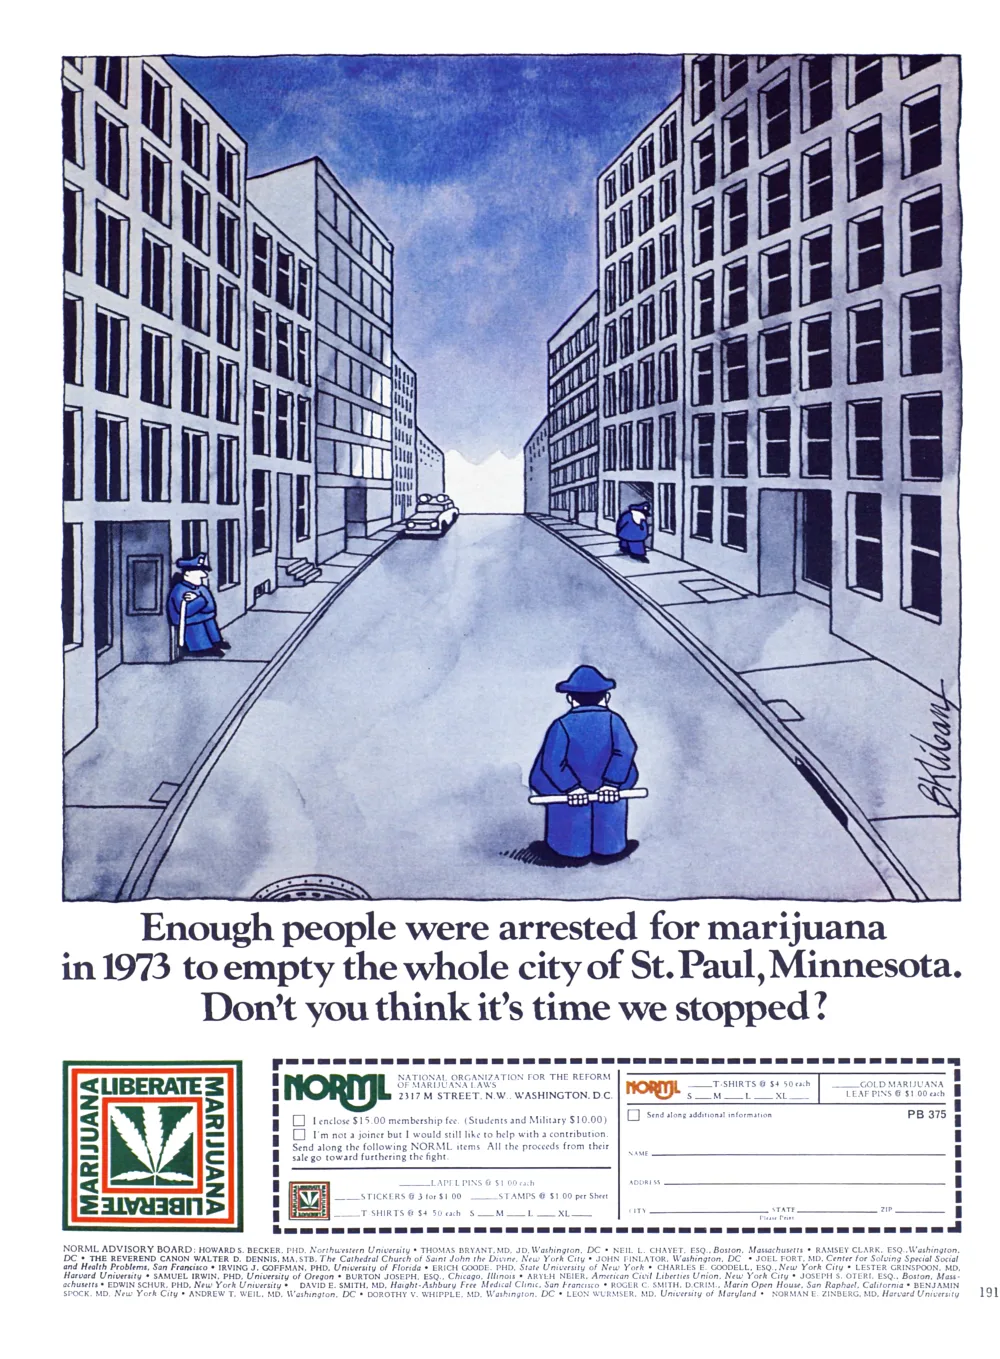 1970 - The Playboy Foundation makes an initial offer of $5,000 to the National Organization for the Reform of Marijuana Laws (NORML), as well as a commitment of $100,000 a year for the following 10 years. This investment allows NORML to continue its campaign against marijuana prohibition and its advocacy for just laws and the fair treatment of users. (1975 NORML Ad run in Playboy Magazine, Cartoon by B. Kliban)